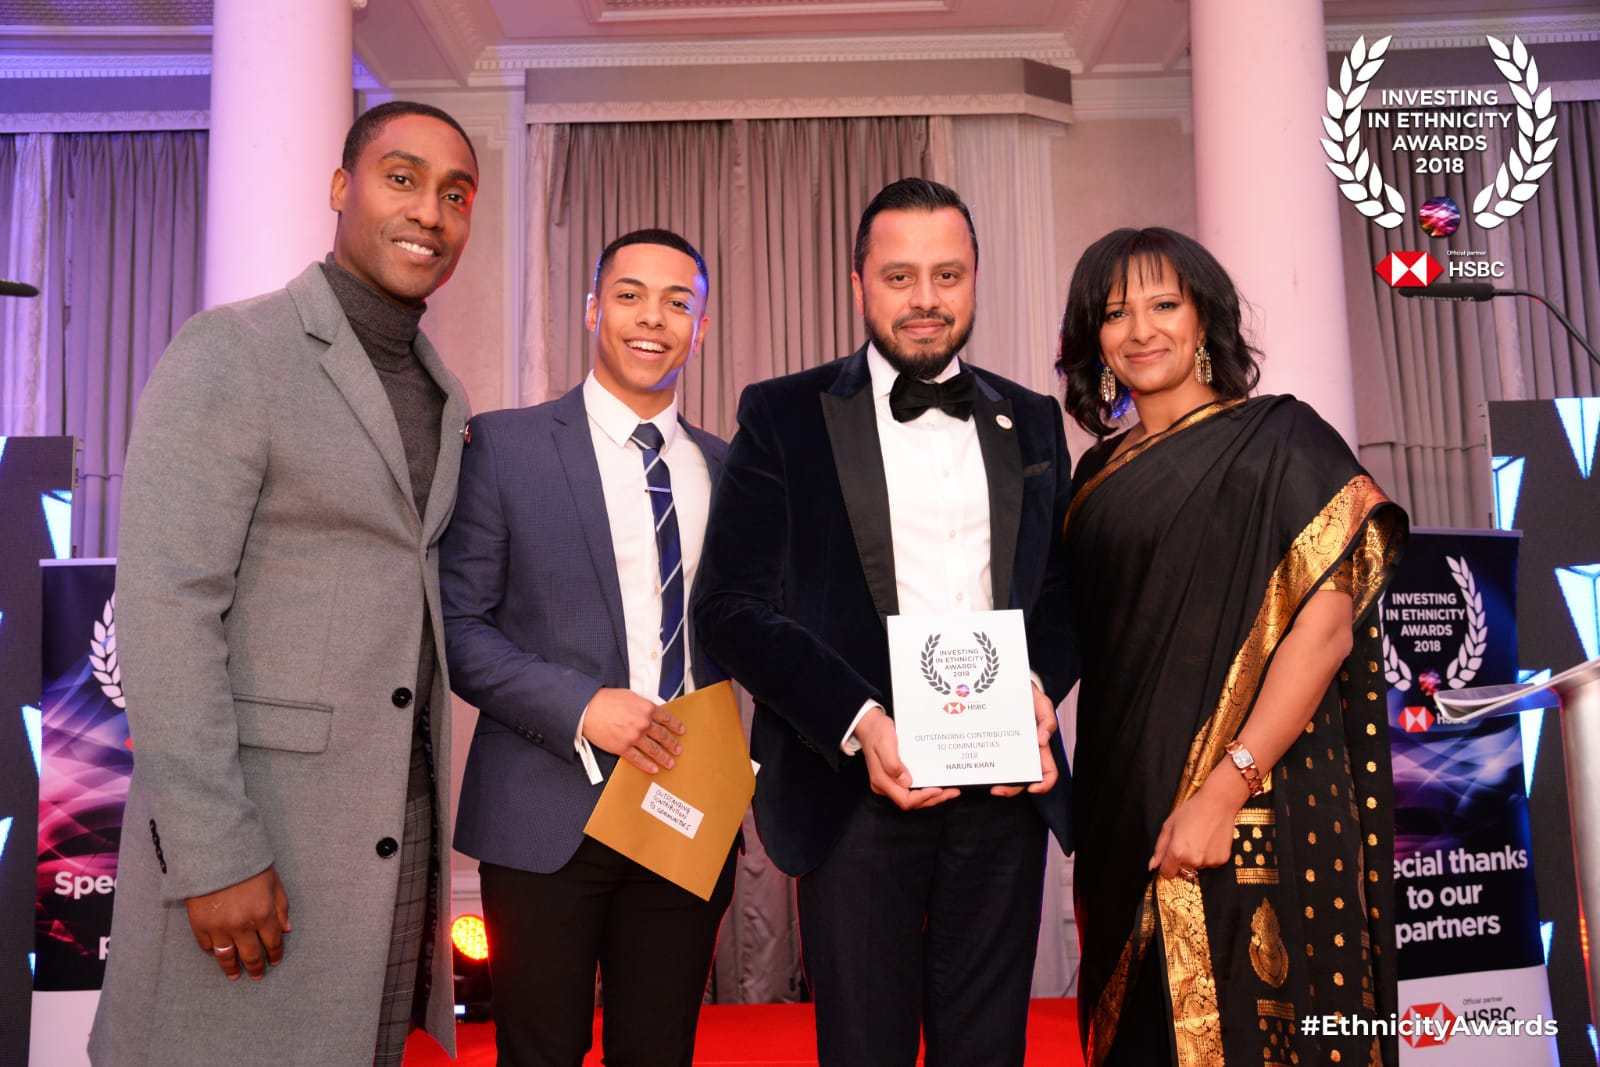 UK Muslim Leader Wins ‘Outstanding Contribution’ Award - About Islam